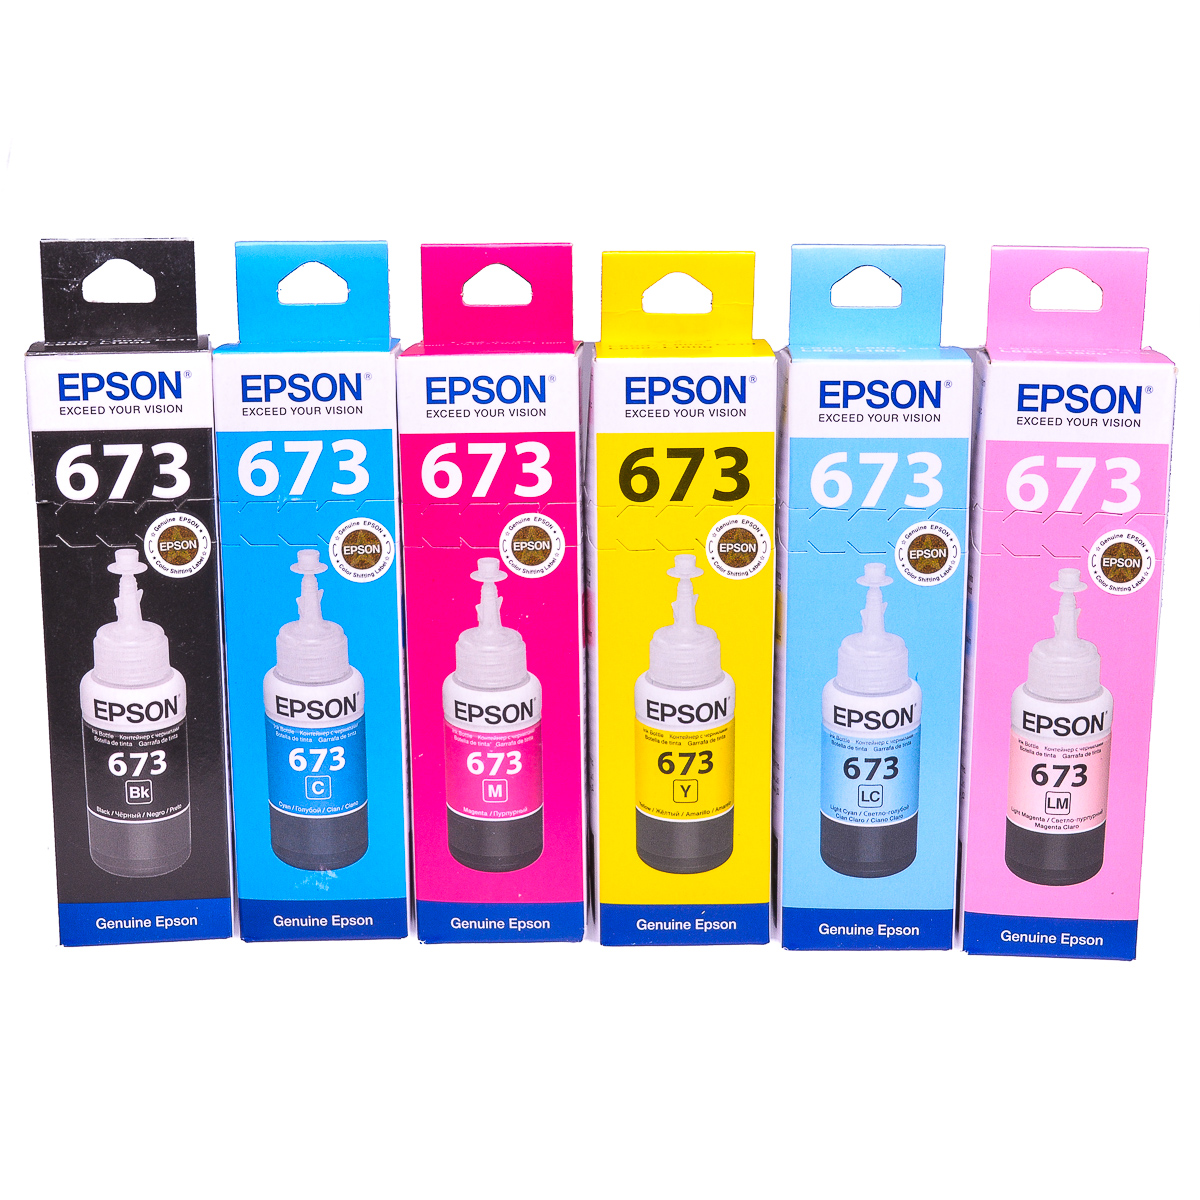 Genuine Multipack ink refill for use with Epson L810 printer